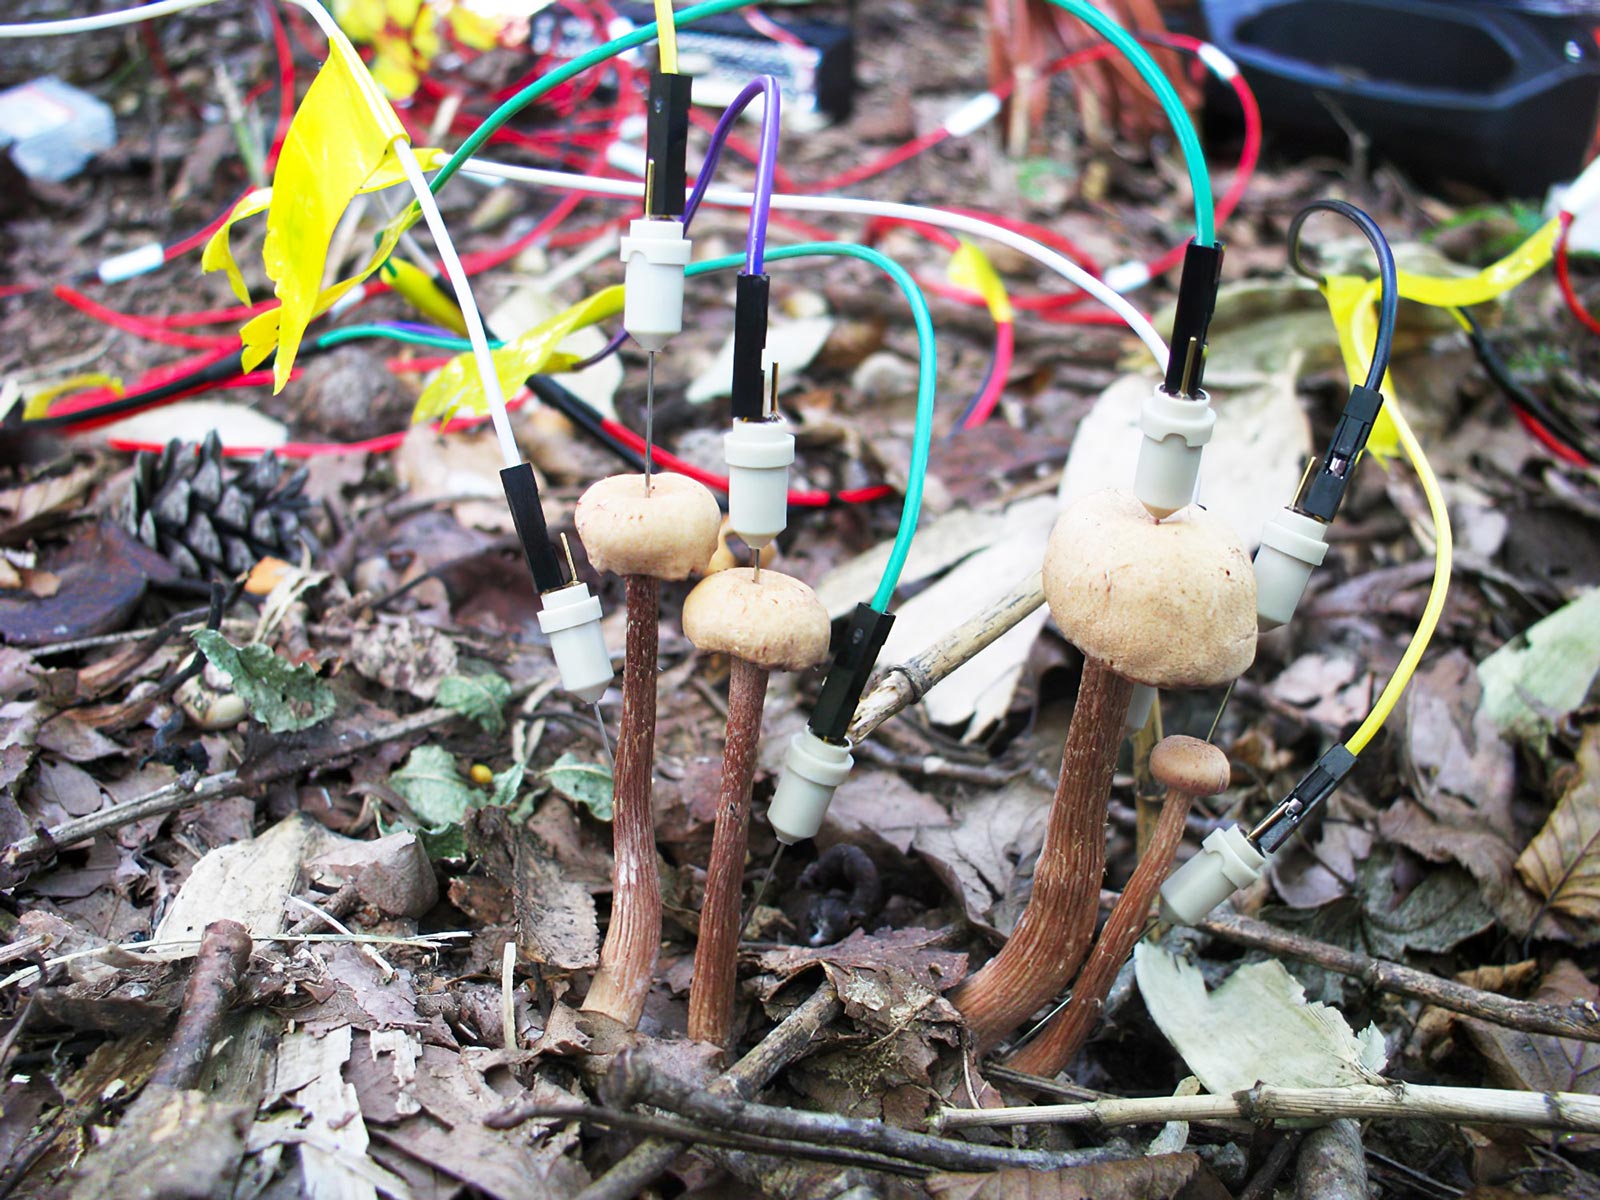 Rainfall Sparks Electric Chatter Among Forest Mushrooms